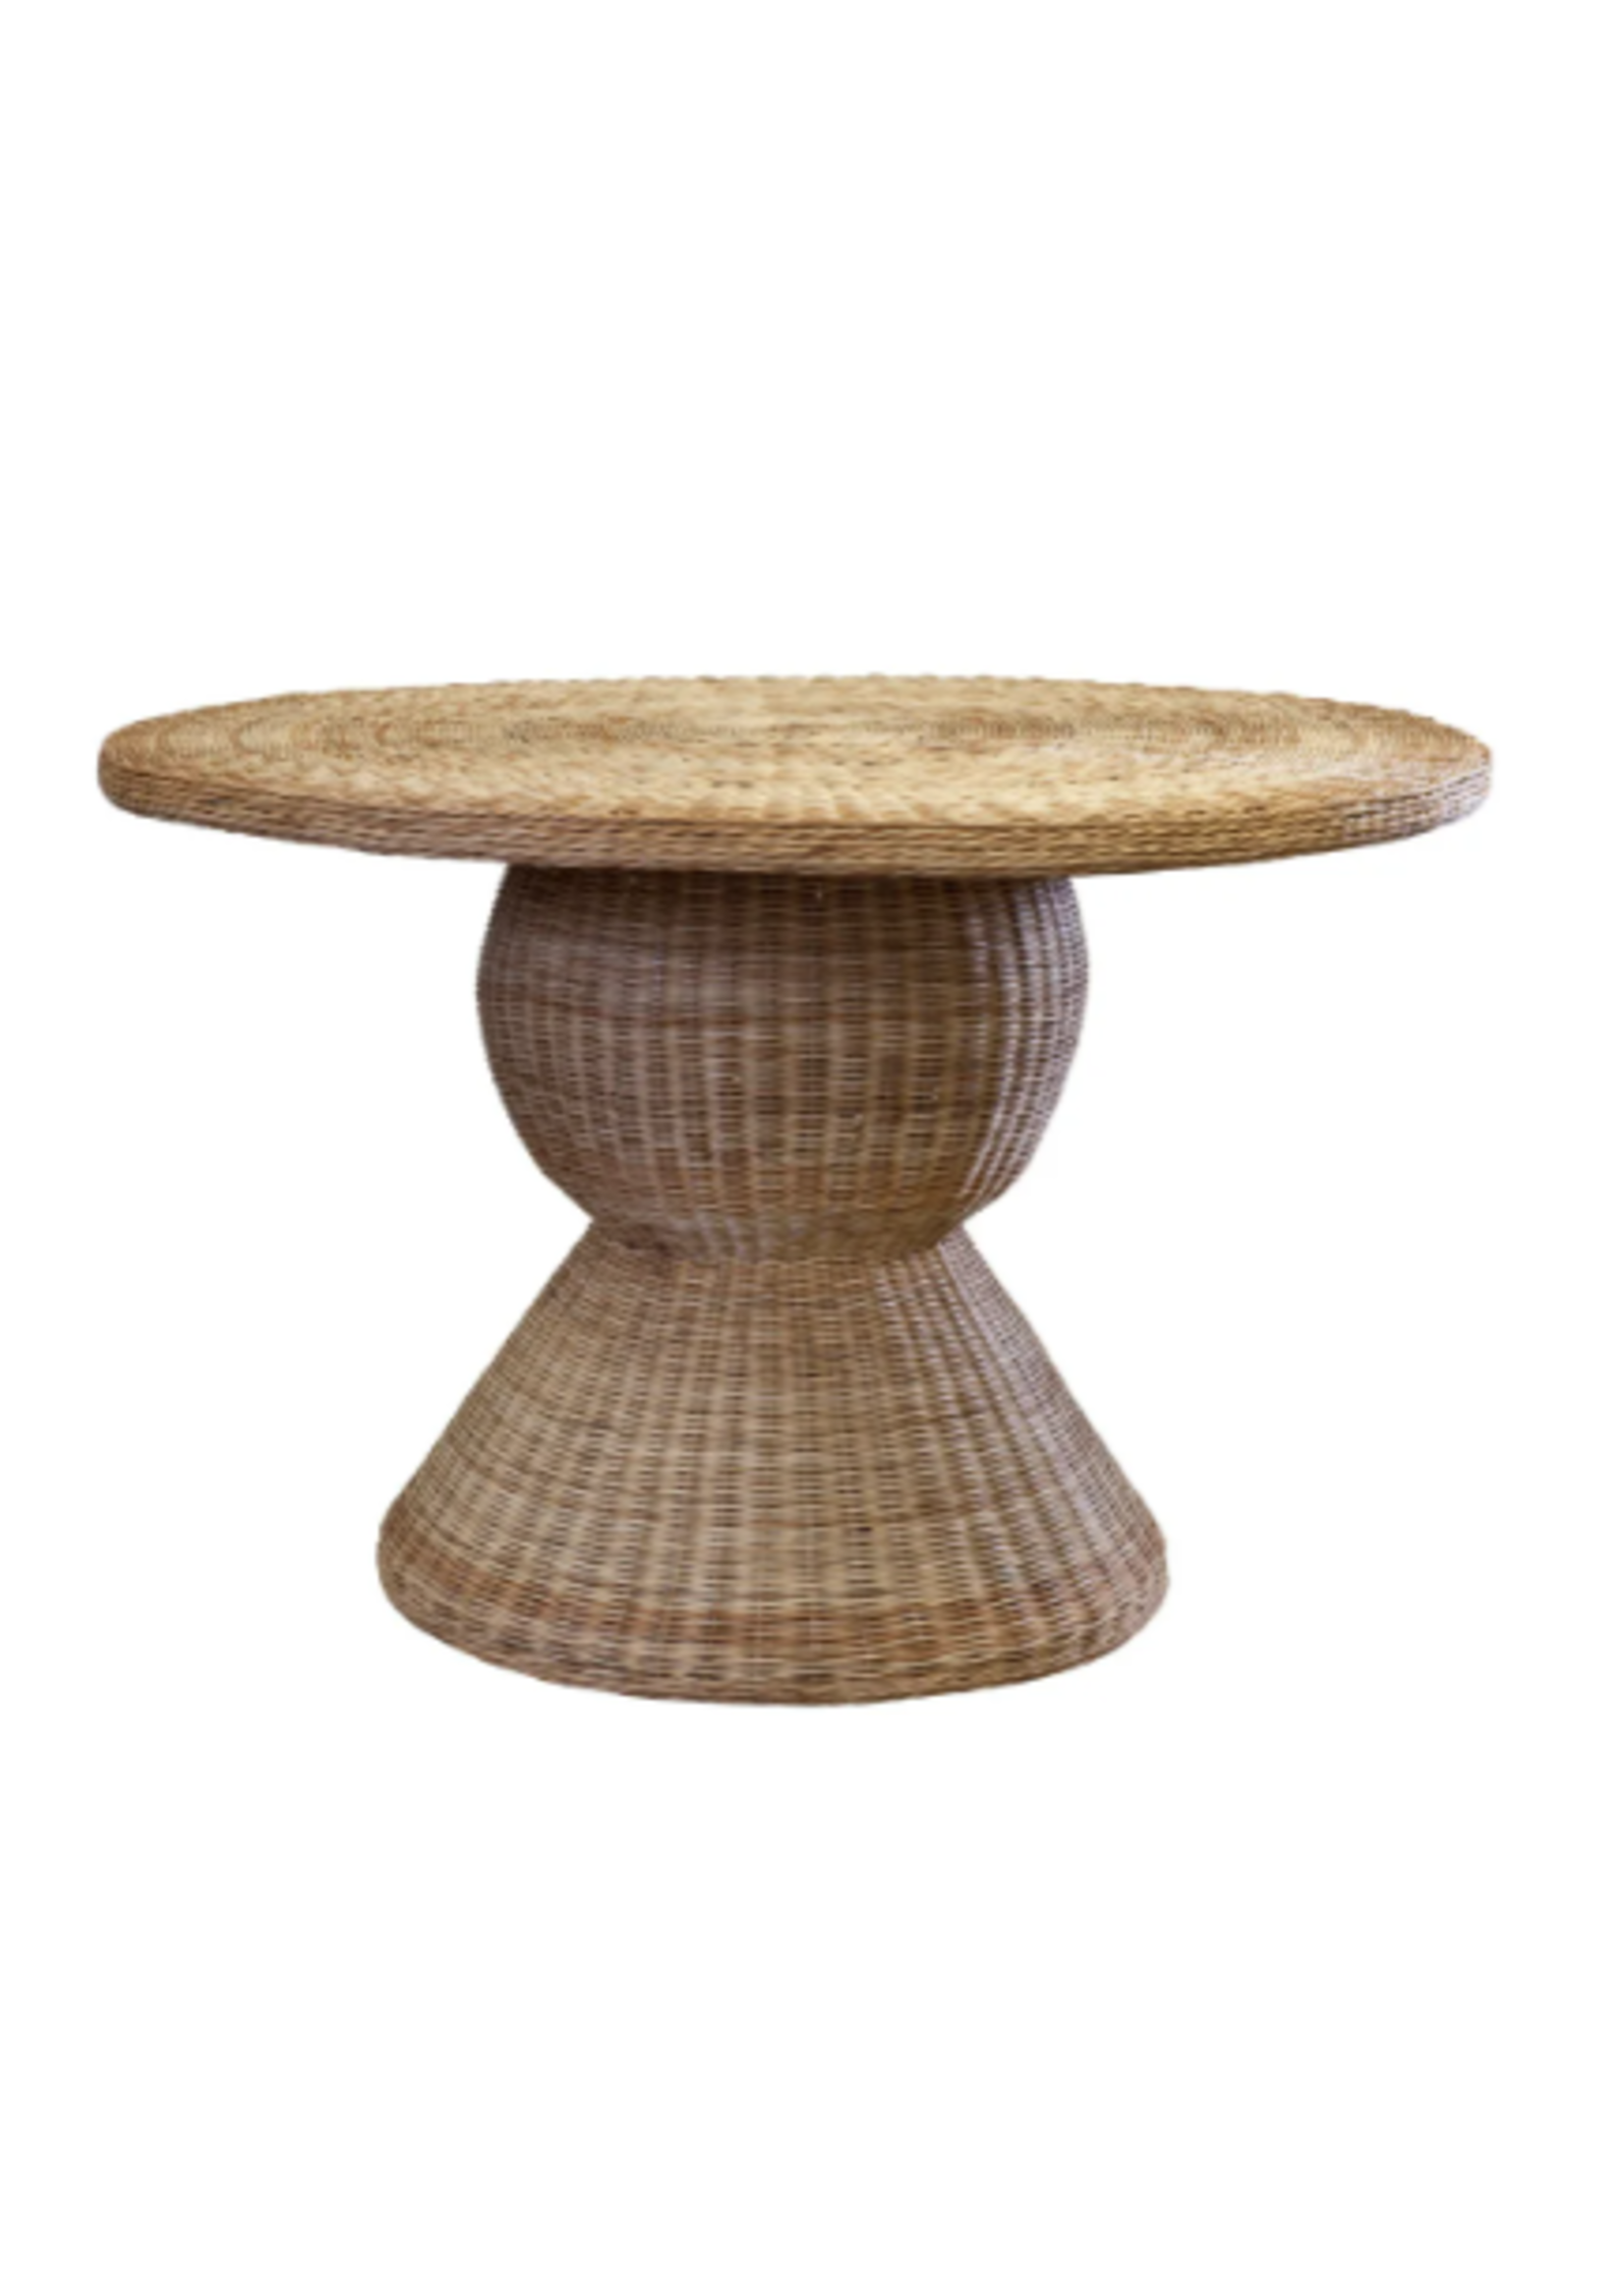 Mainly Baskets Mainly Baskets Wicker Pedestal Table  48" Round